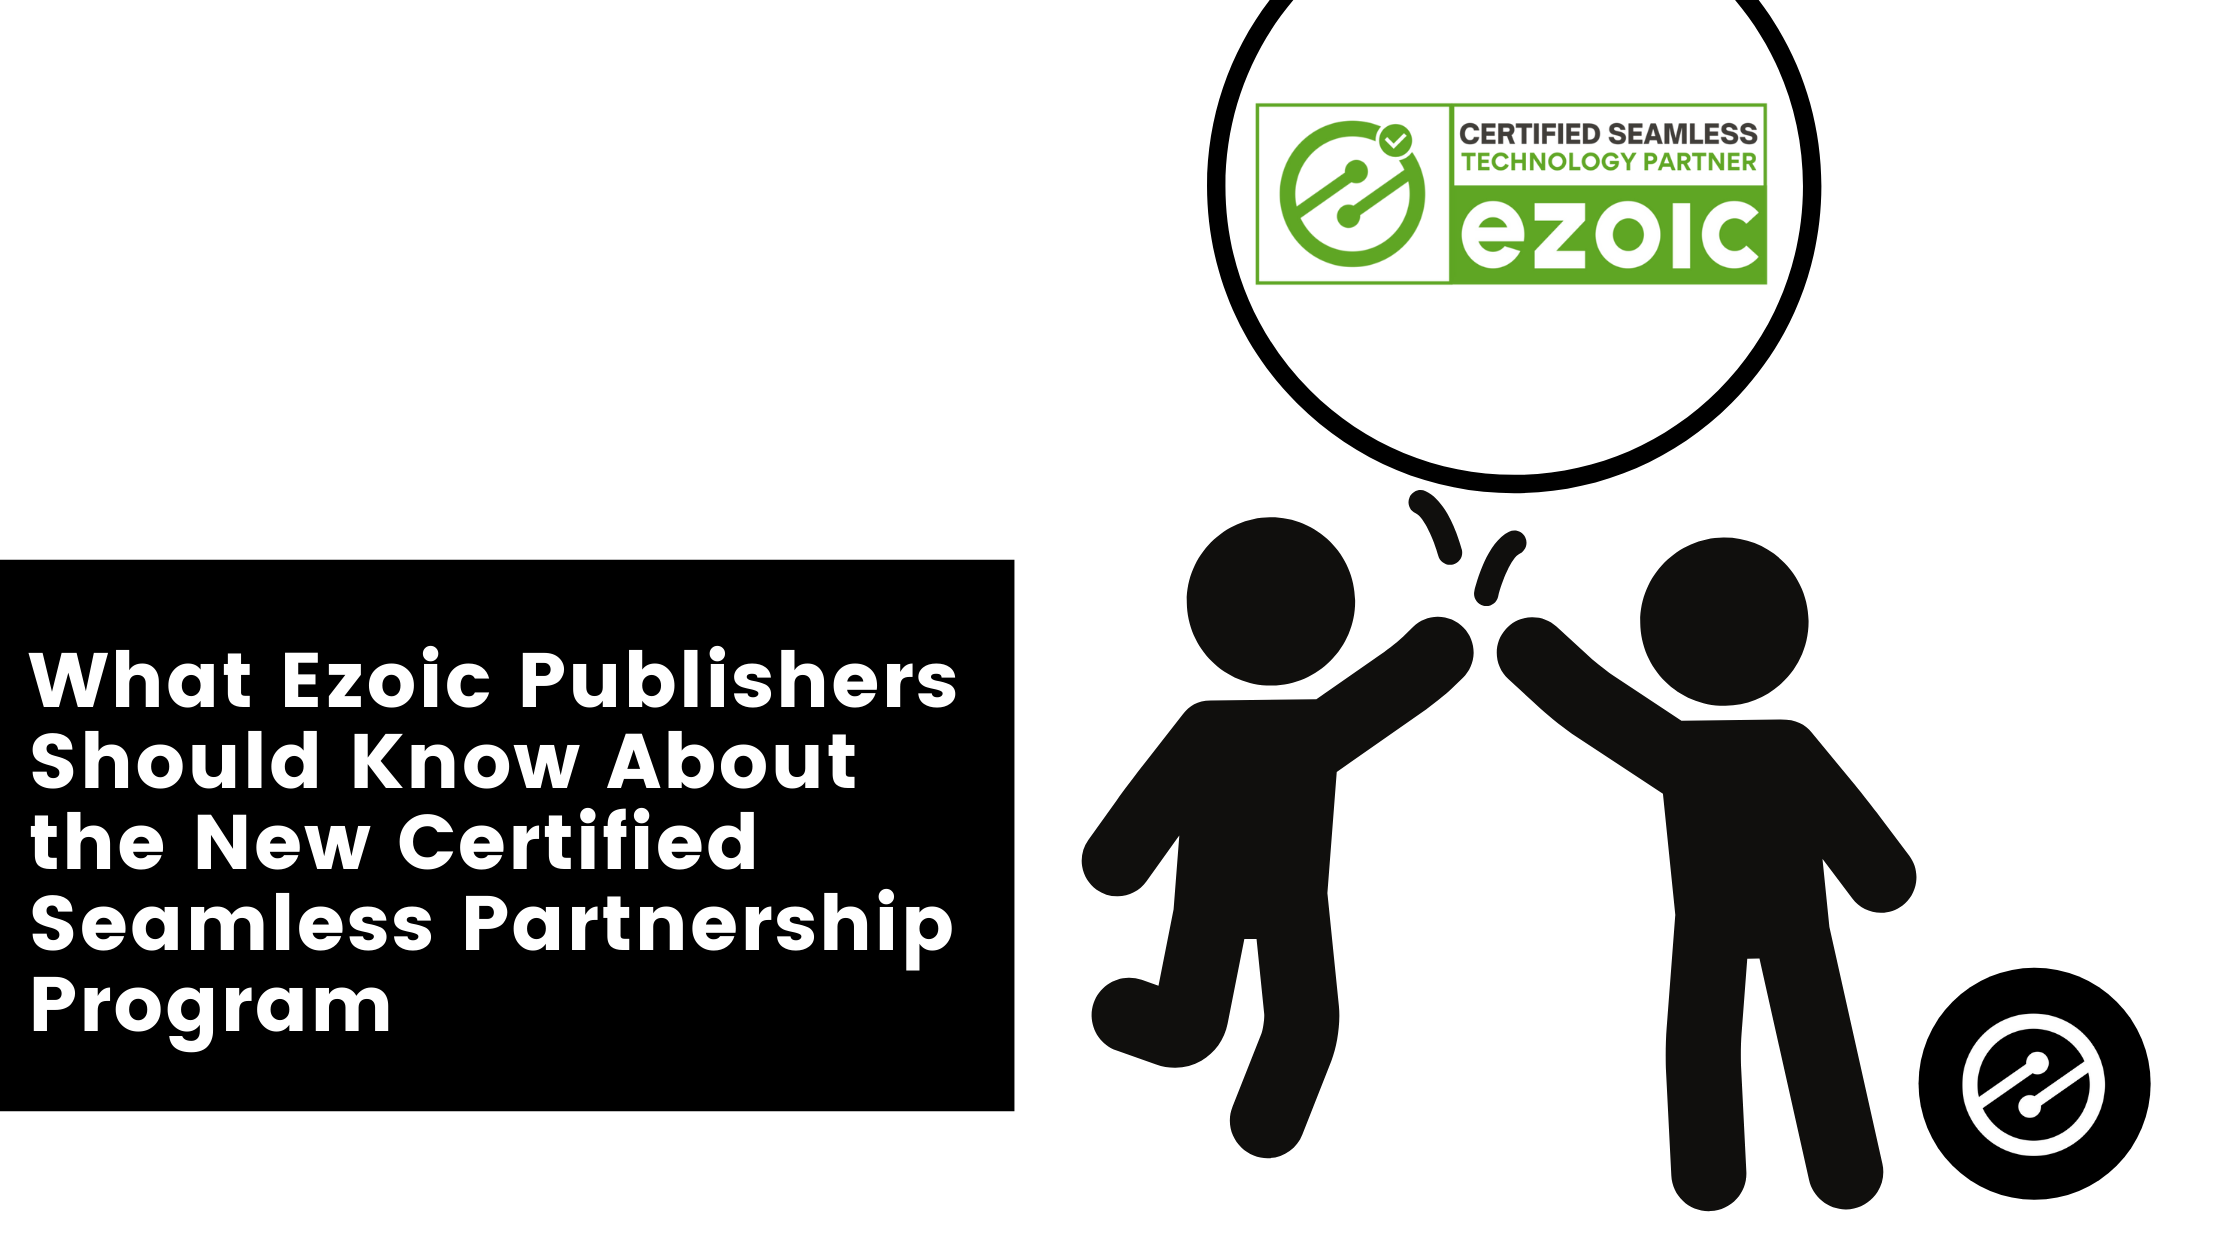 What Ezoic Publishers Should Know About the New Certified Seamless Partnership Program